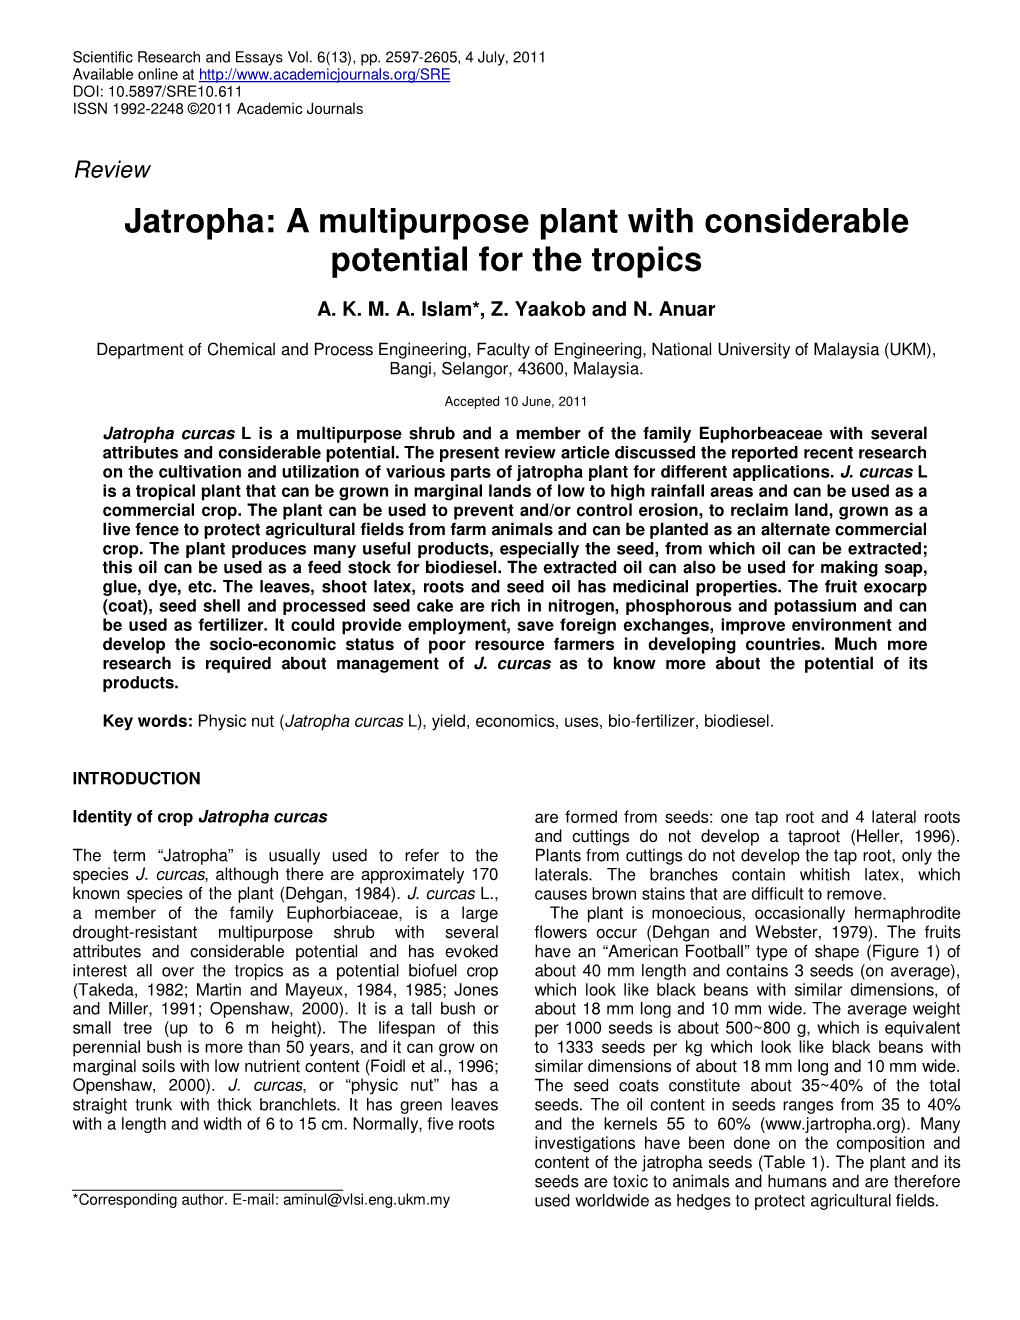 Jatropha: a Multipurpose Plant with Considerable Potential for the Tropics